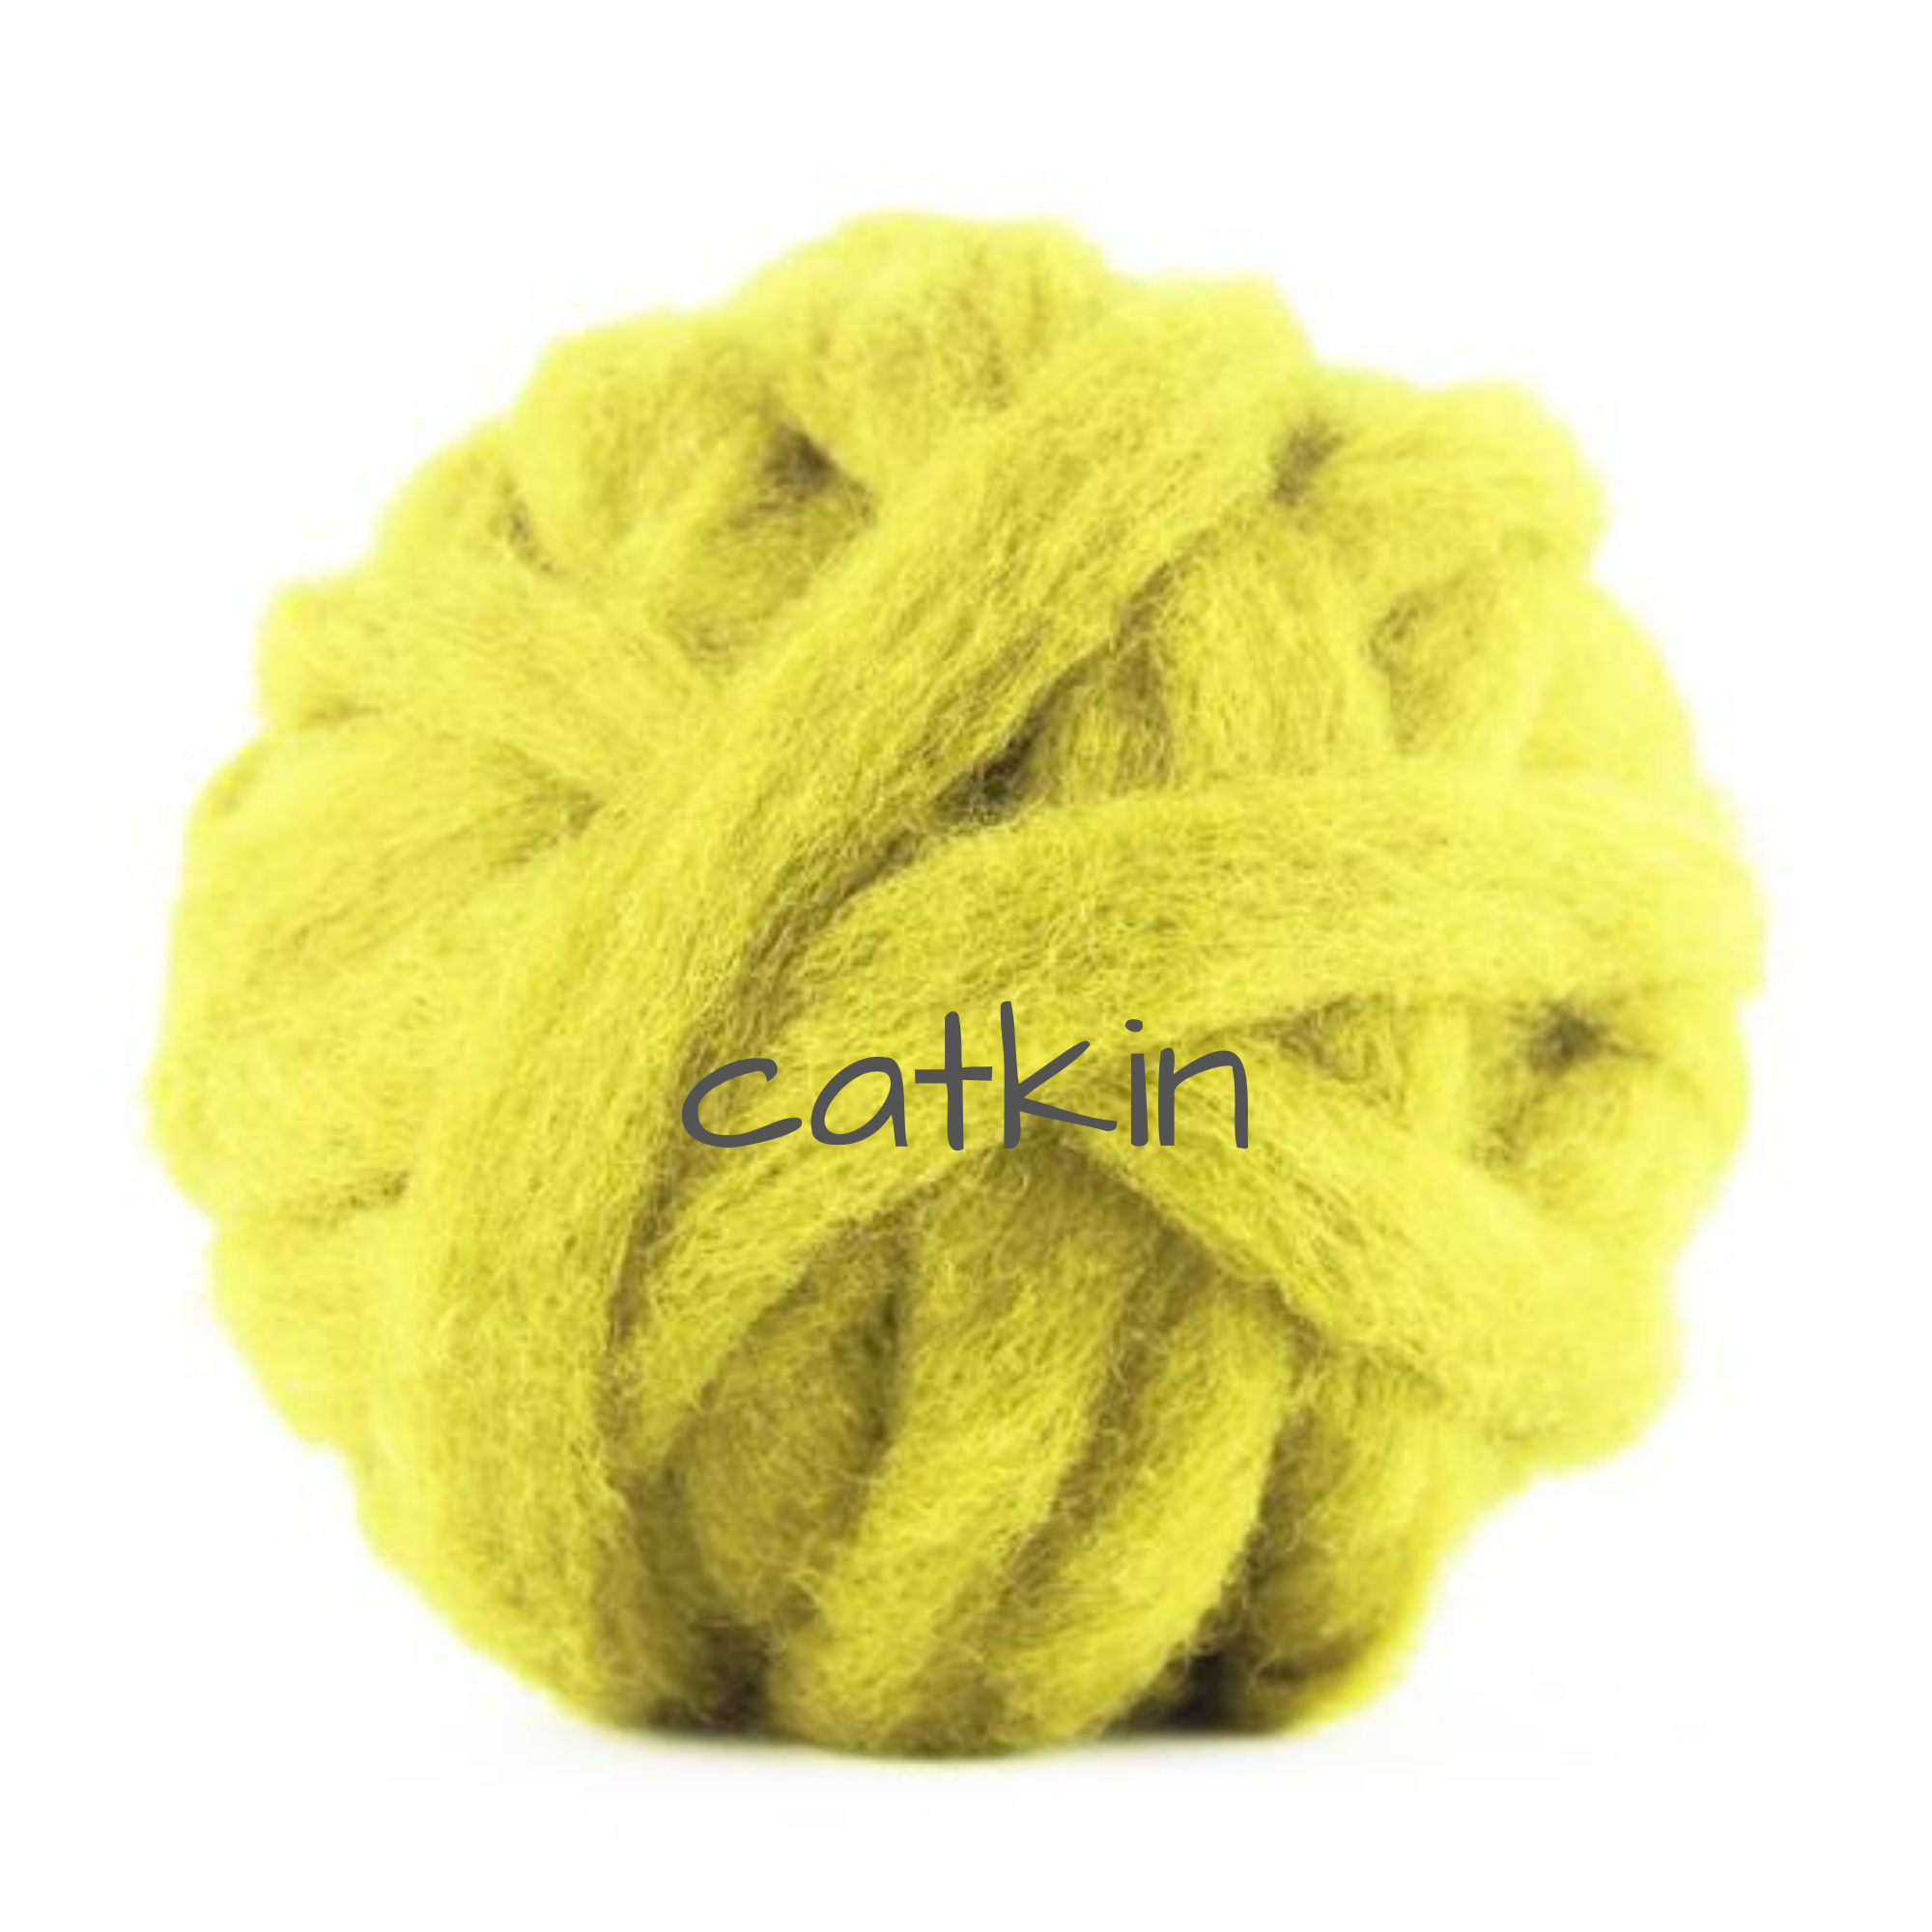 Carded Corriedale Slivers - Catkin Yellow